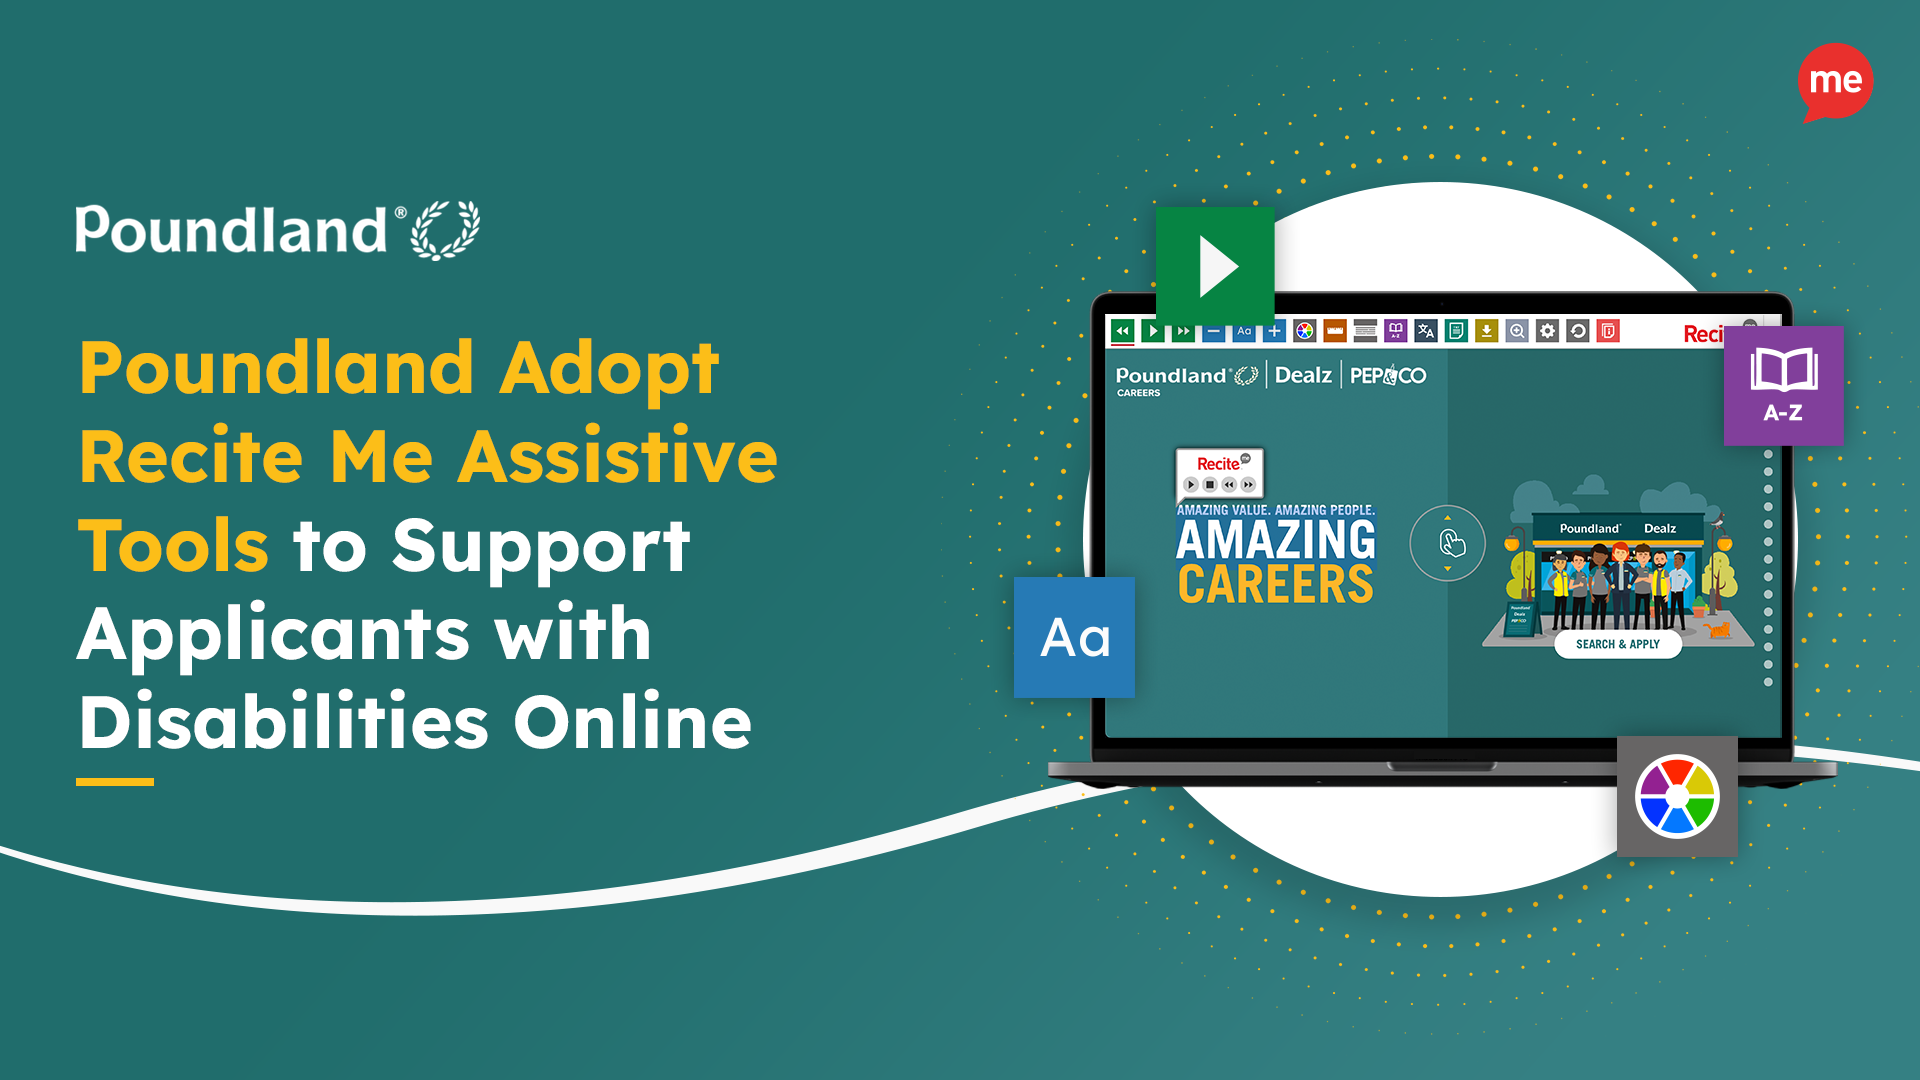 Poundland Adopt Recite Me Assistive Tools to Support Applicants with Disabilities Online